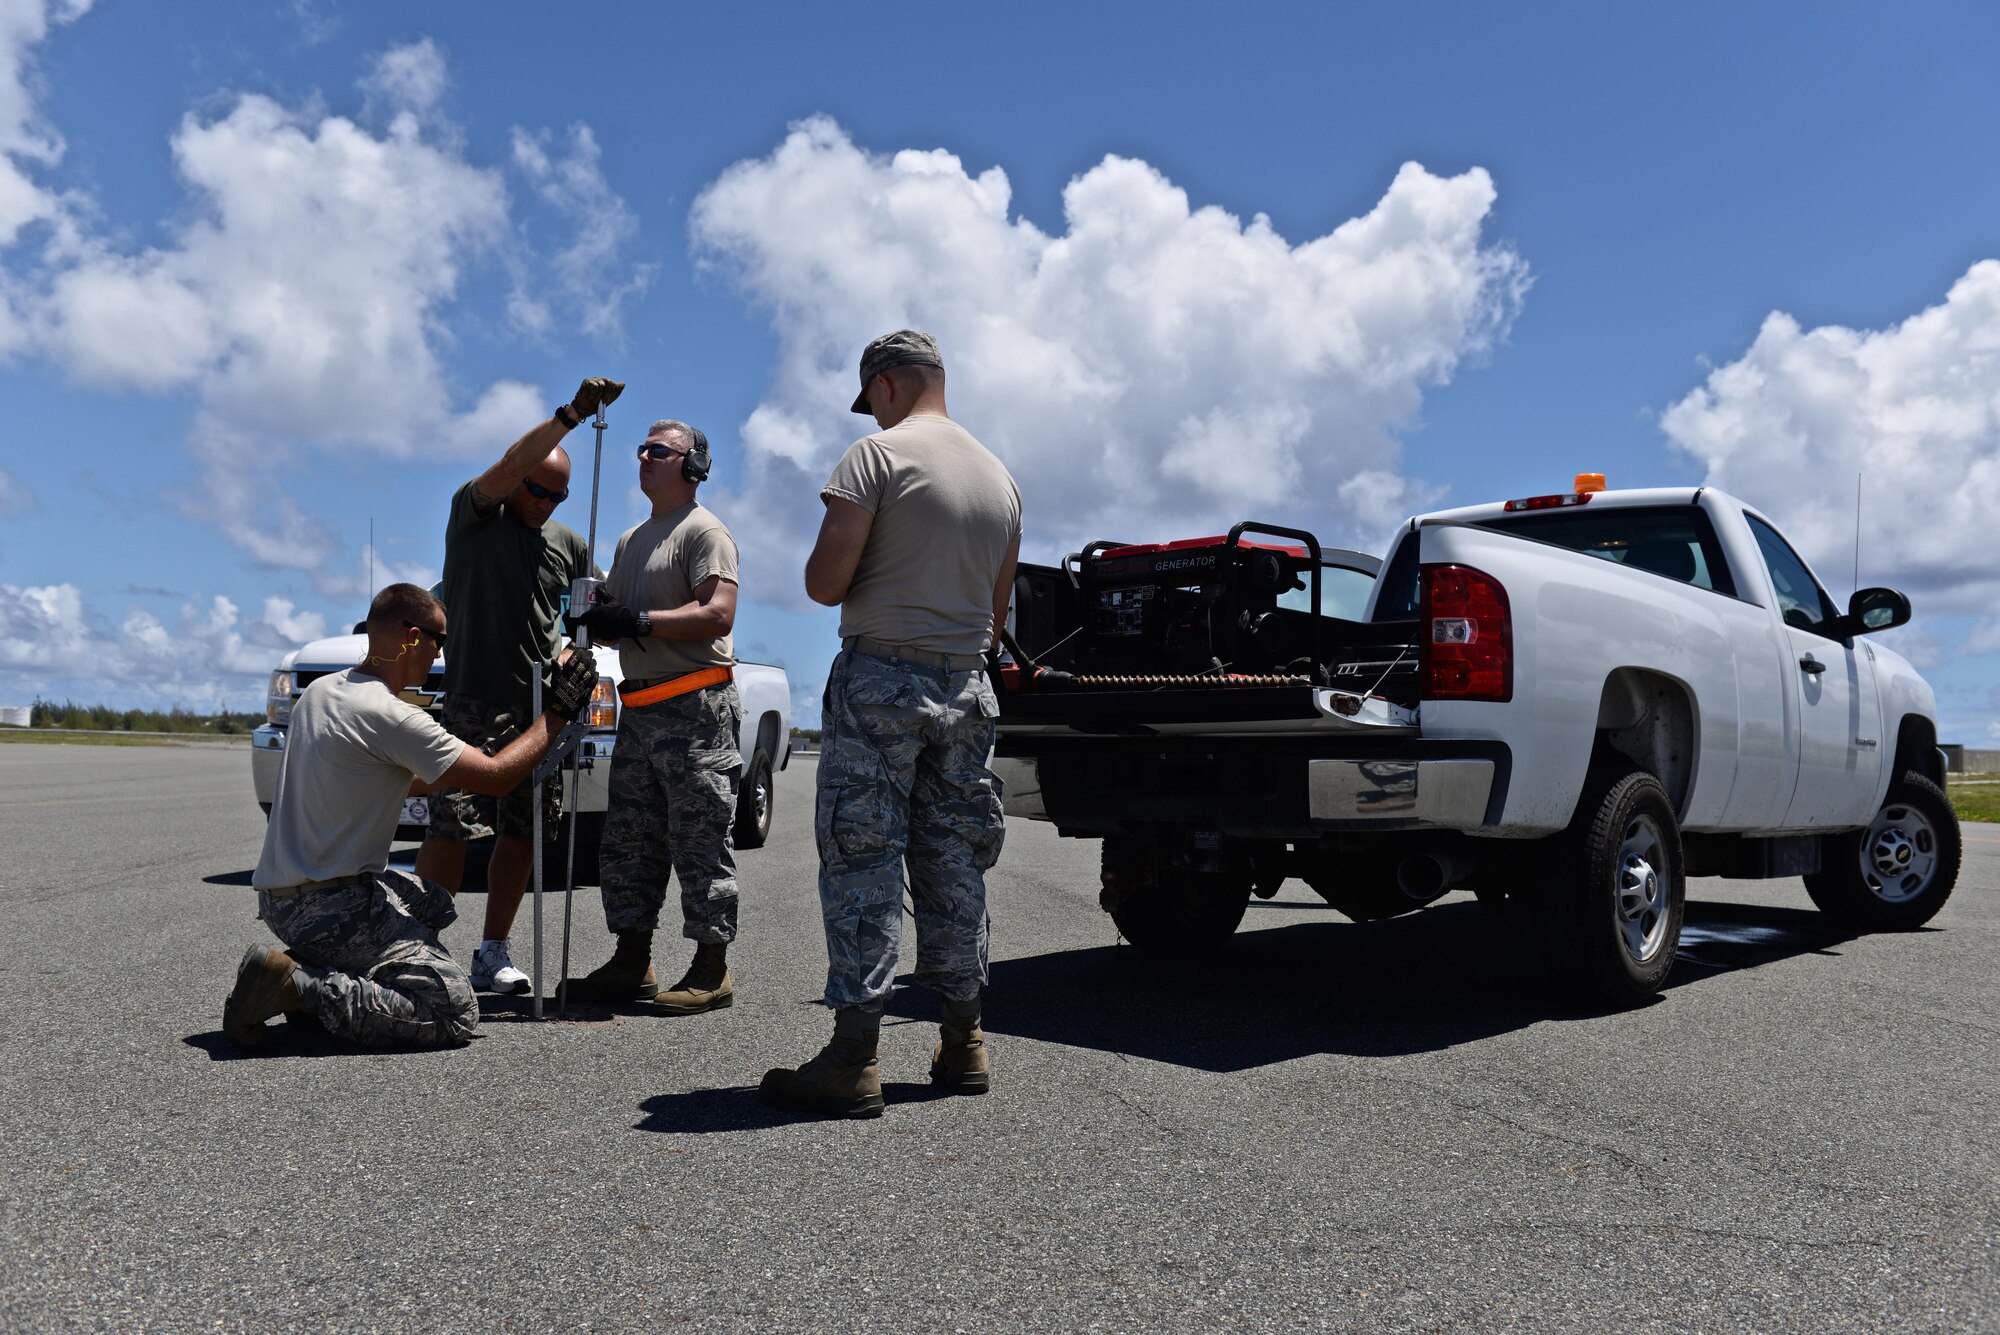 A U.S. Air Force civil engineer team with the 36th Contingency Response Group from Andersen Air Force Base, Guam, tests subsurface reliability of Wake Island Airfield, July 20, 2015, on Wake Island. The Airmen assisted in storm recovery efforts after the island was evacuated a few days earlier in preparation forTyphoon Halola. (U.S. Air Force photo by Senior Airman Alexander W. Riedel/Released)
